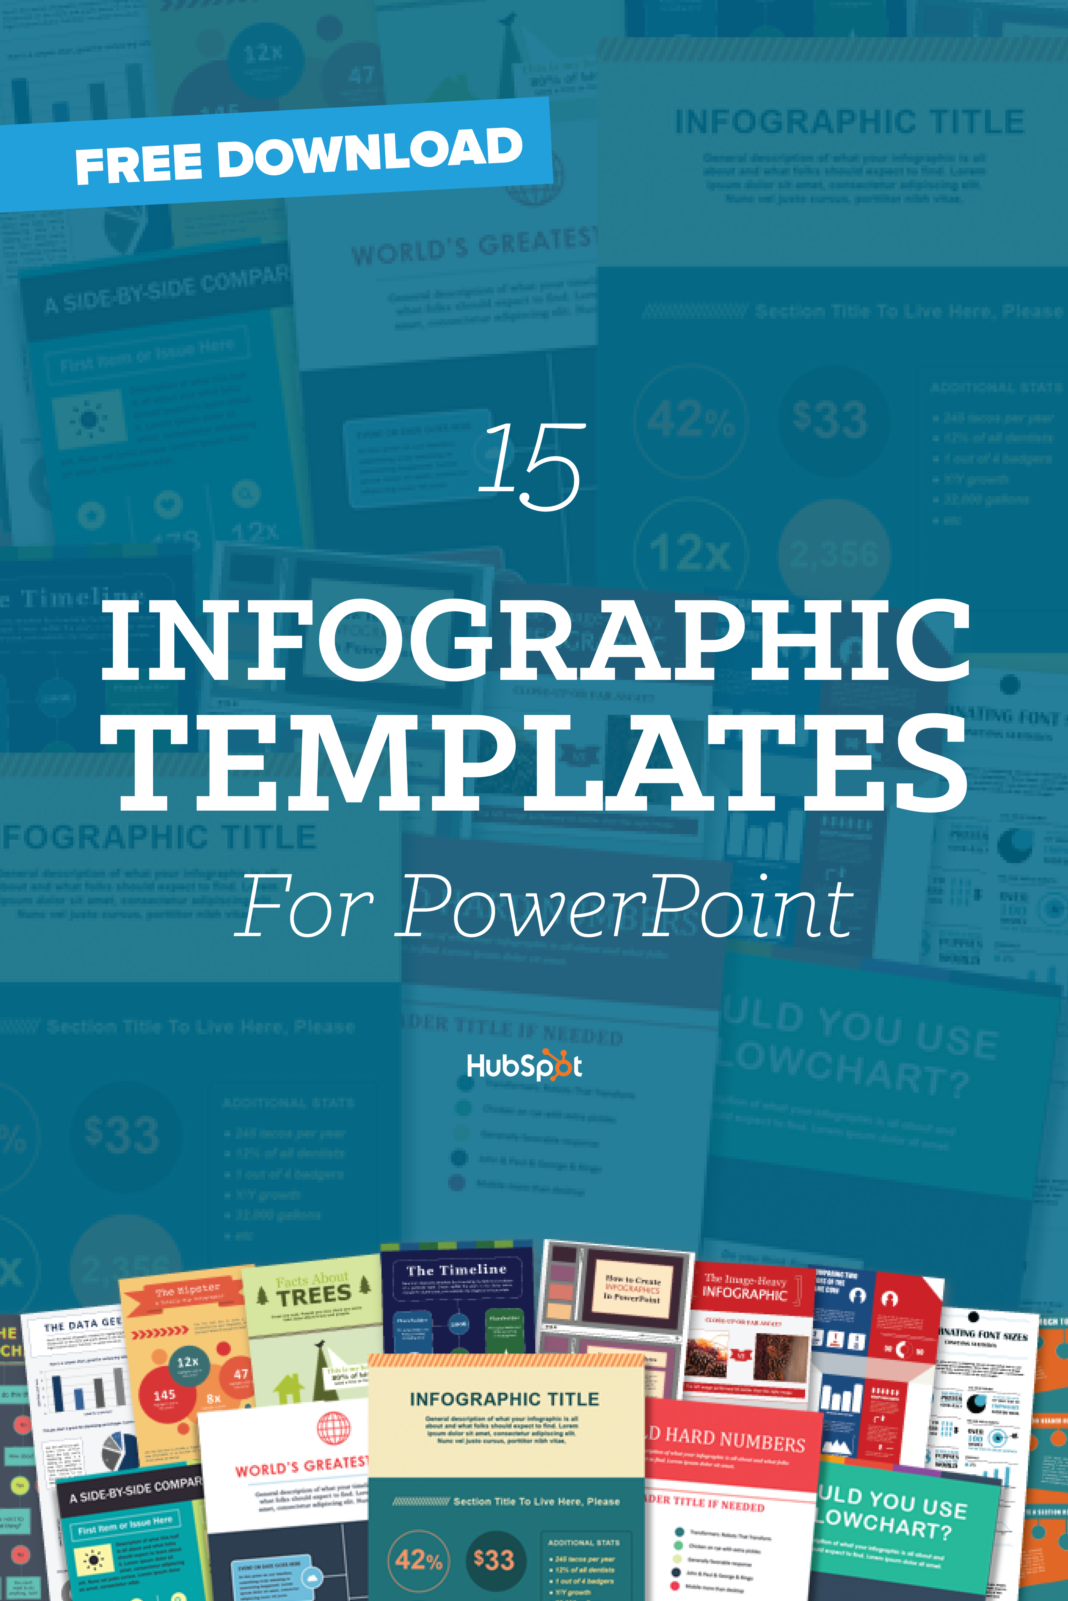 infographic template 15 Free Infographic Templates InfographicNow